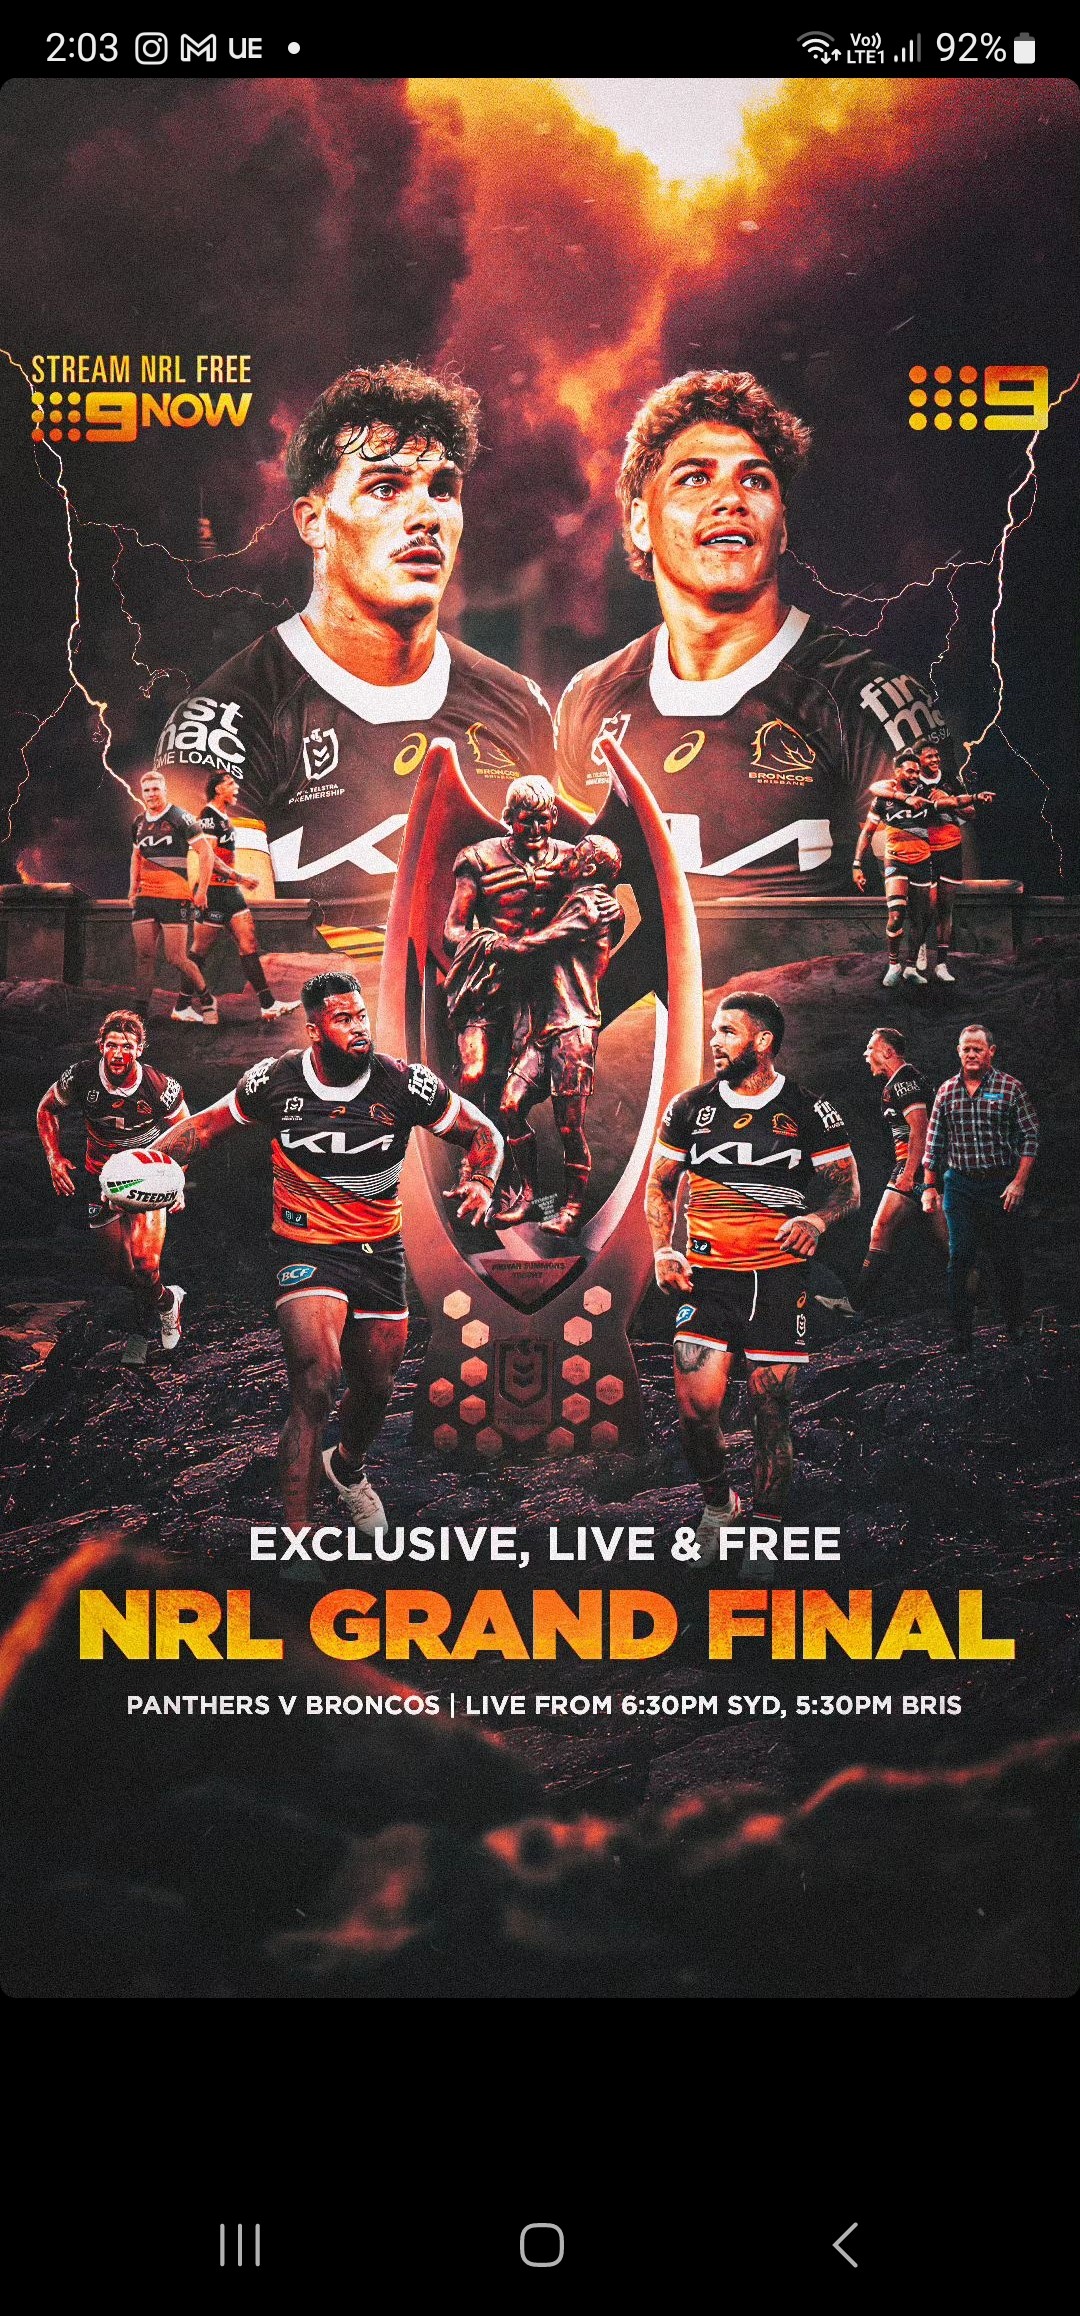 GRAND FINAL DAY - 2023 NRL Grand Final Day